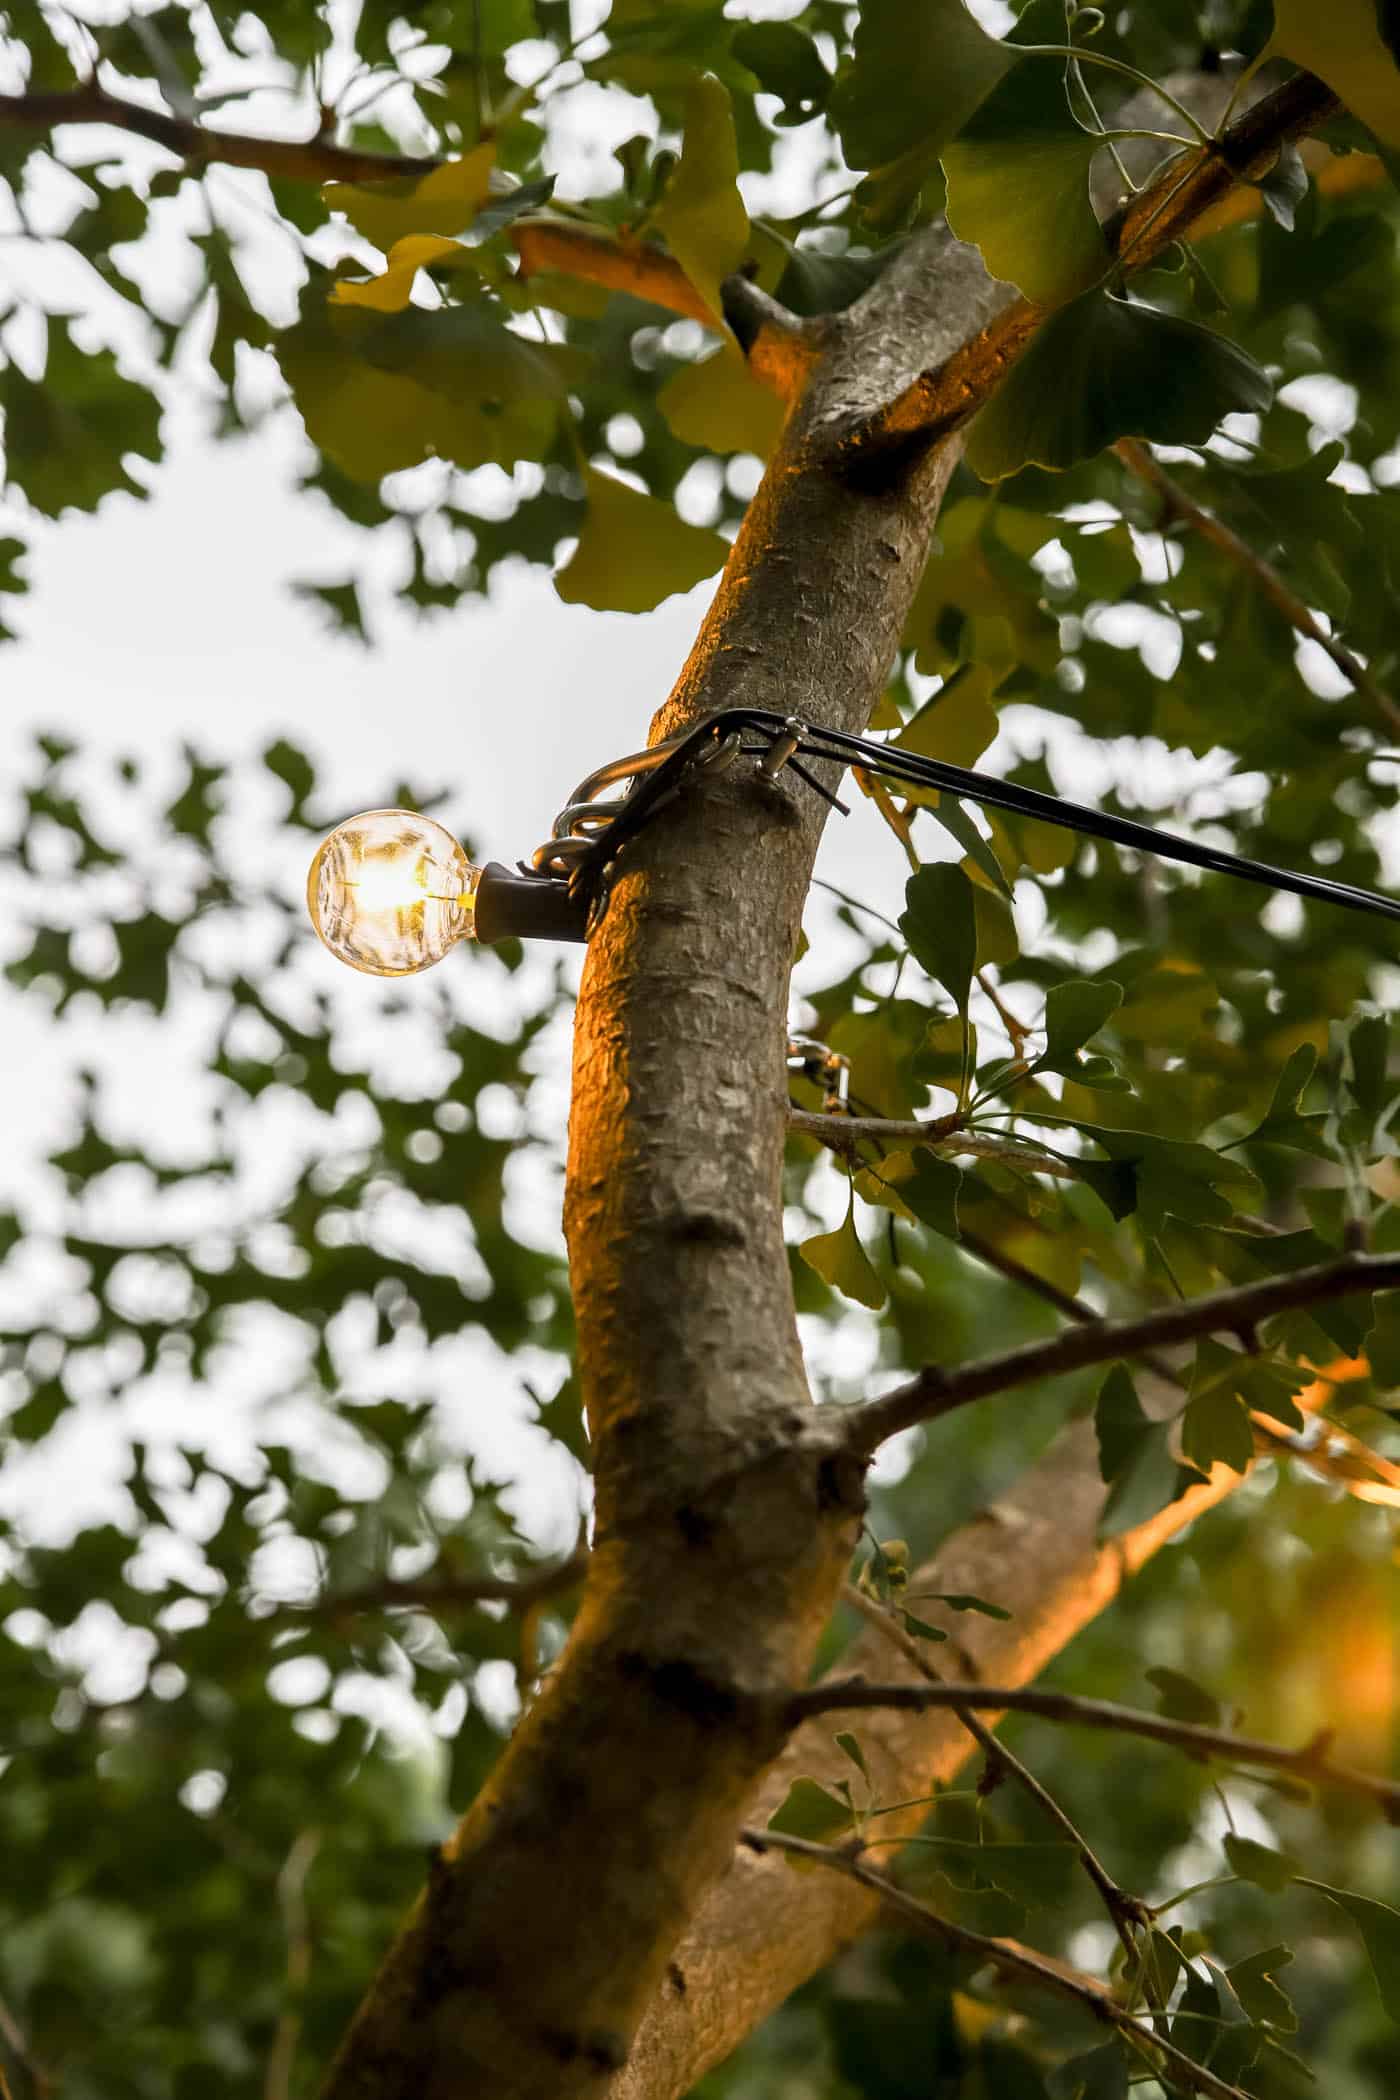 string lights attached to a tree branch.